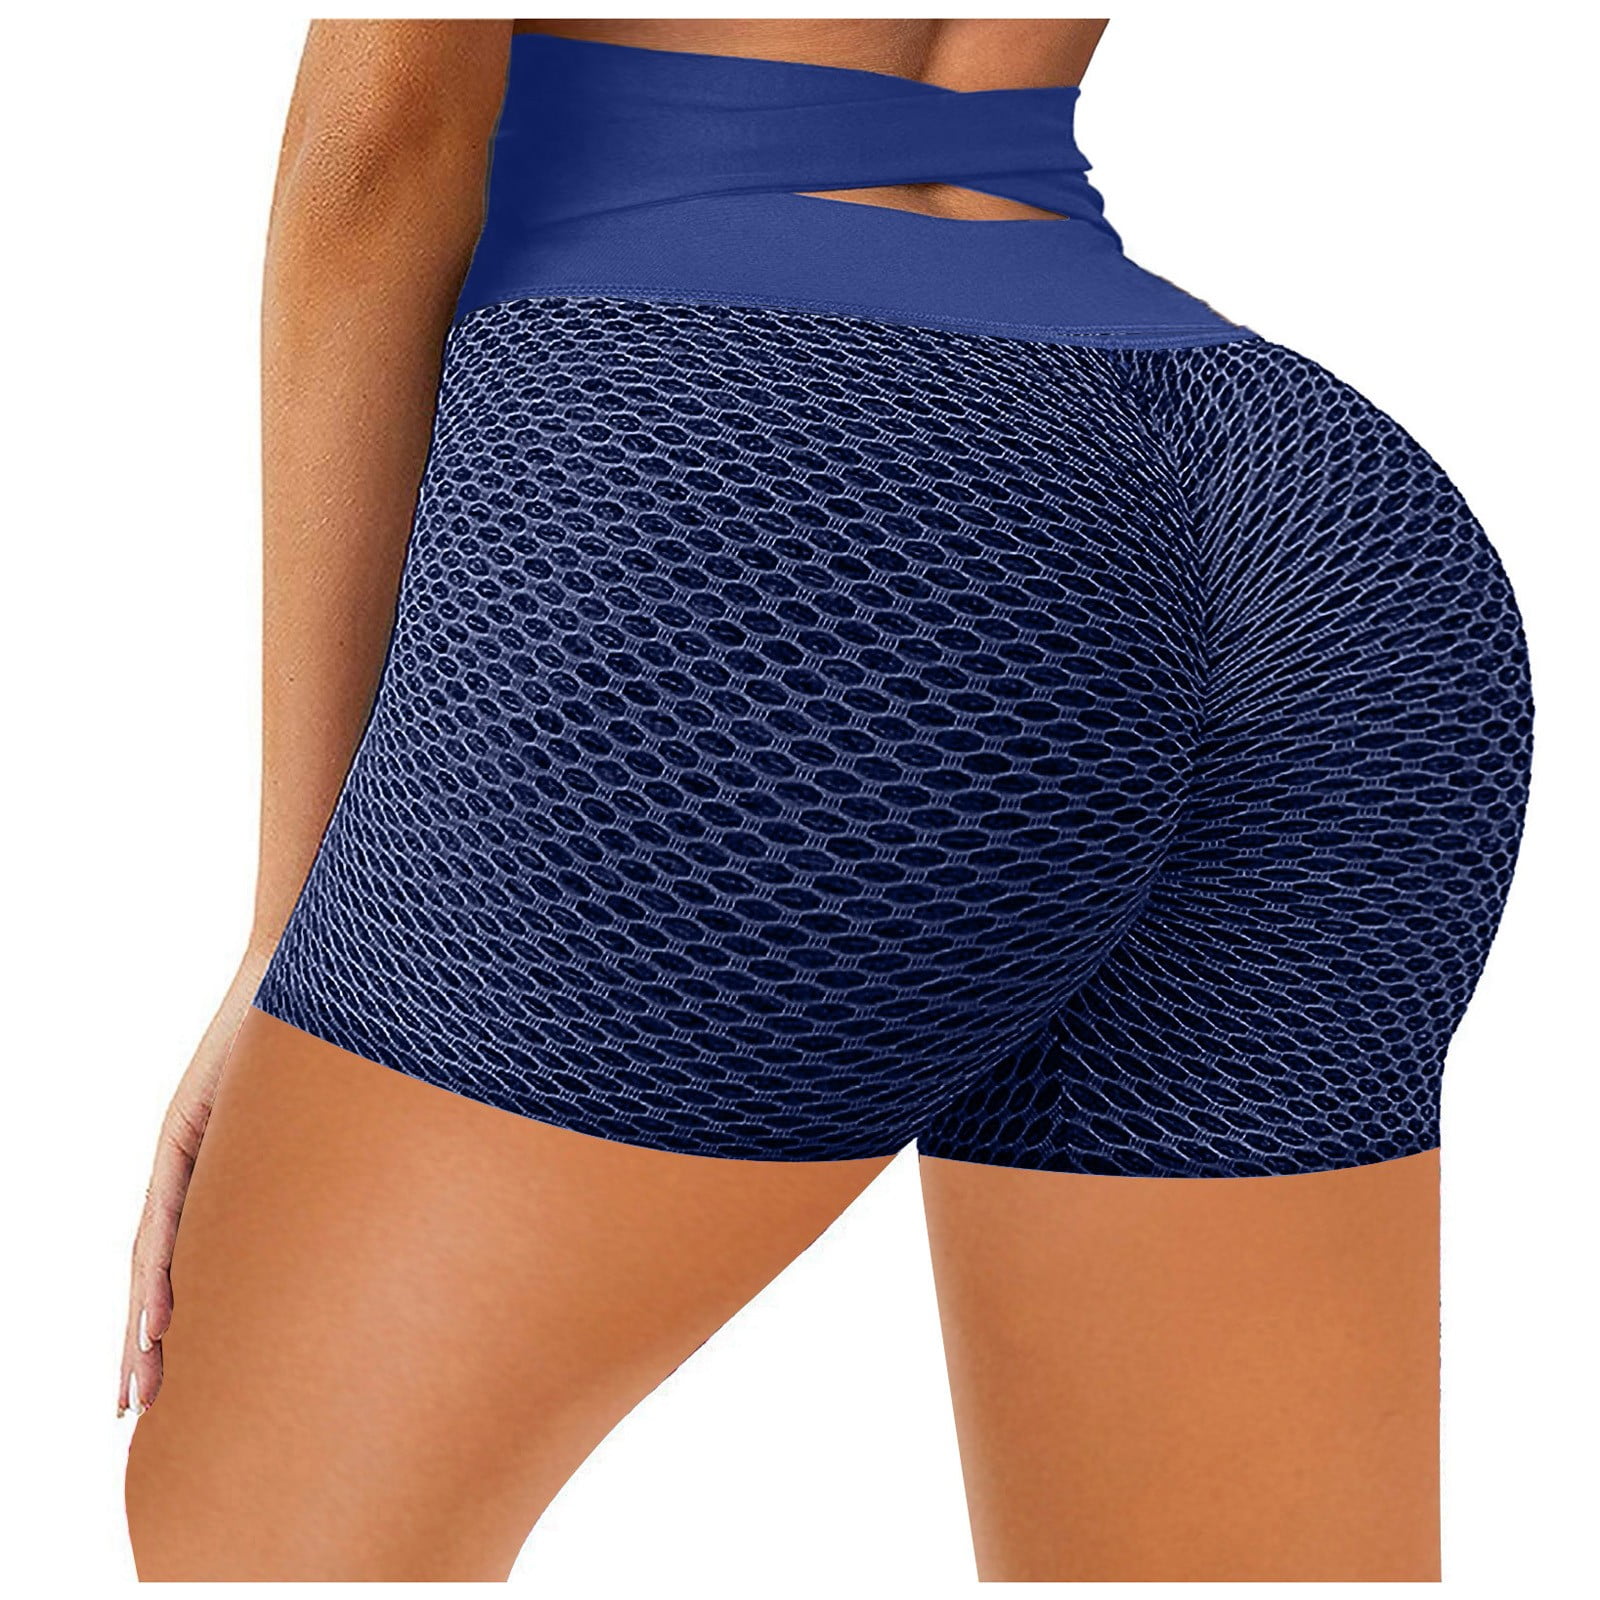 HSMQHJWE Thick Yoga Pants for Women Women's Casual Tight-fitting Skinny  Lifting Fitness Sports Yoga Shorts Mens Yoga Pants with Pockets